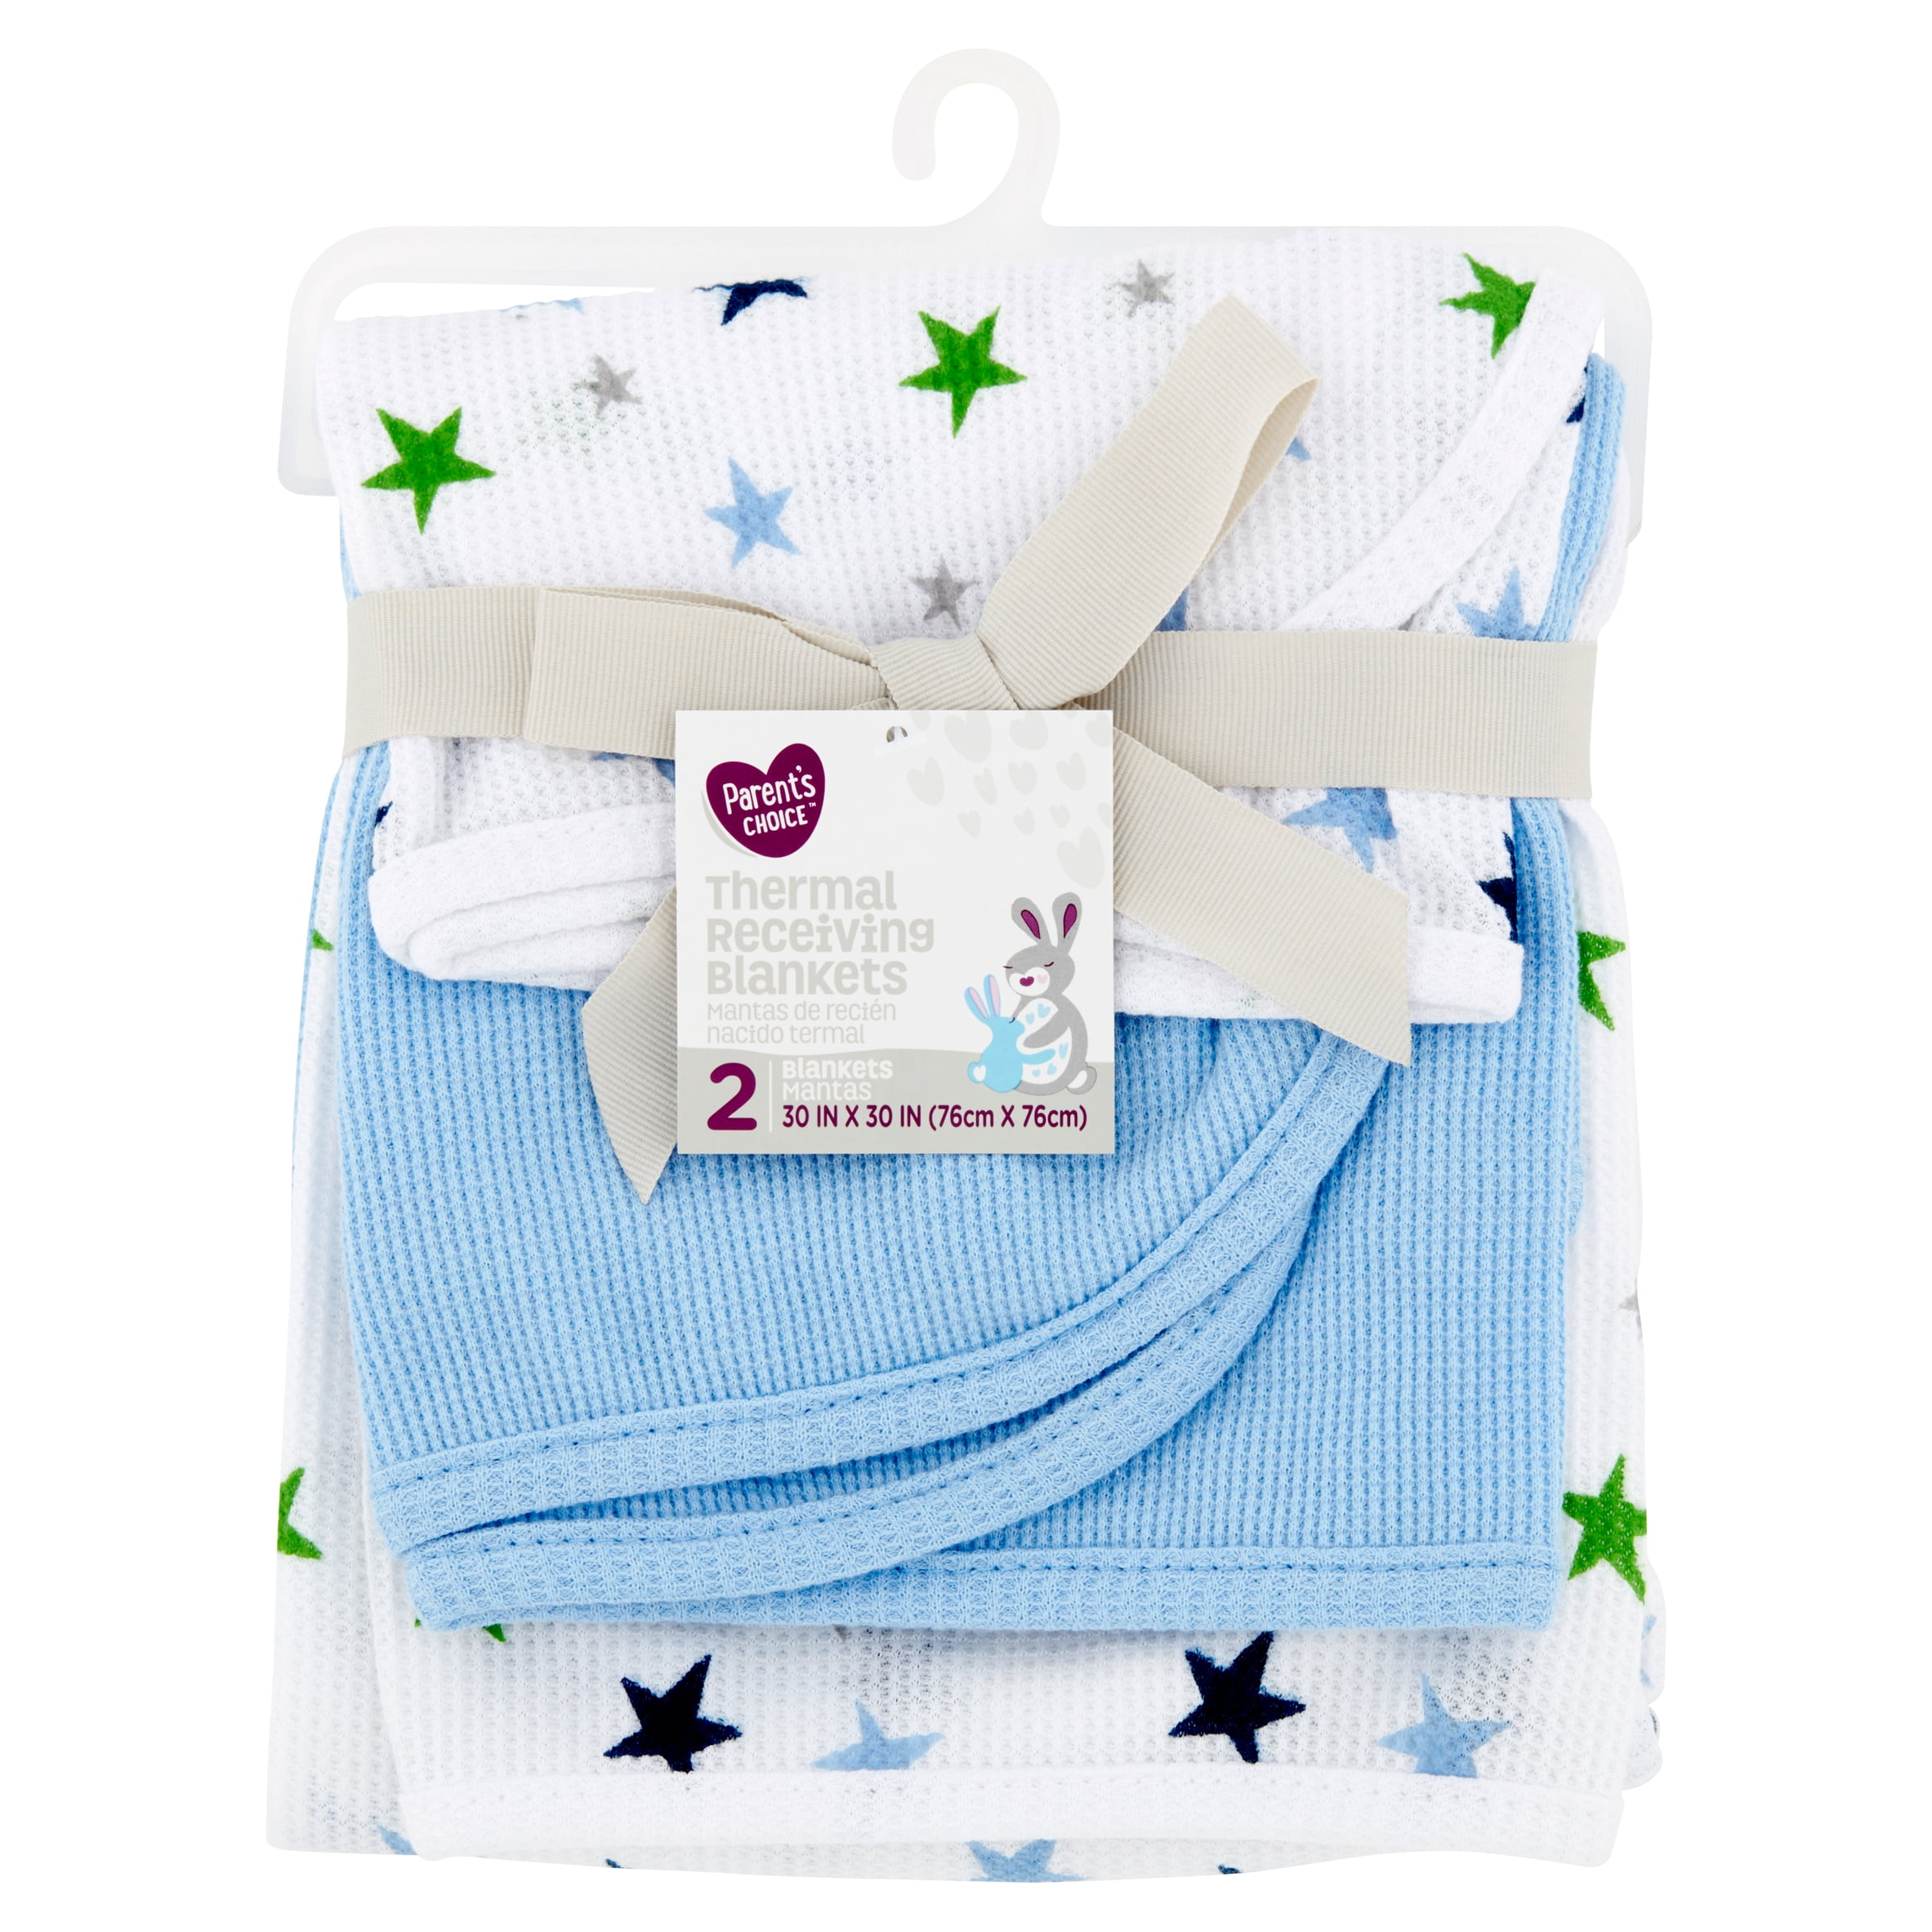 Parents Choice Thermal Receiving Blankets